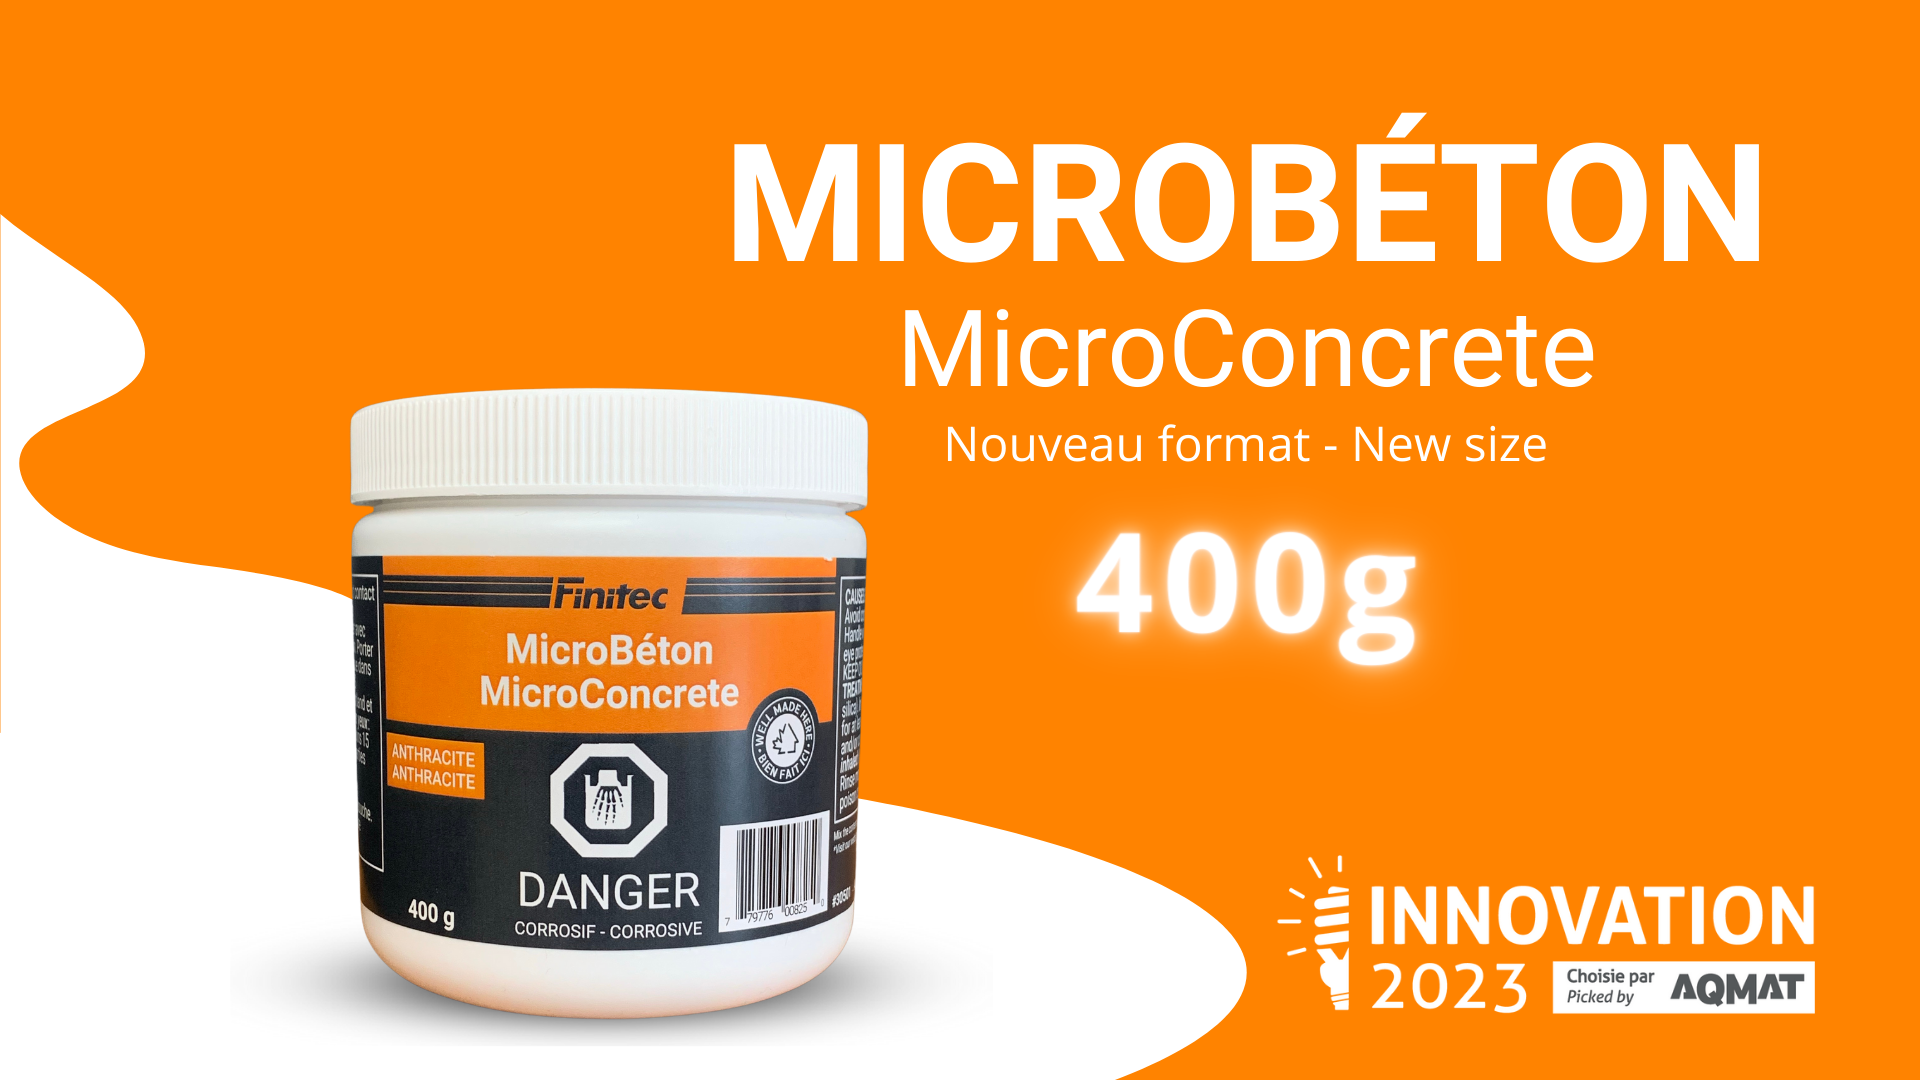 Discover our new MicroConcrete format - 400g: Ideal for testing the Product!